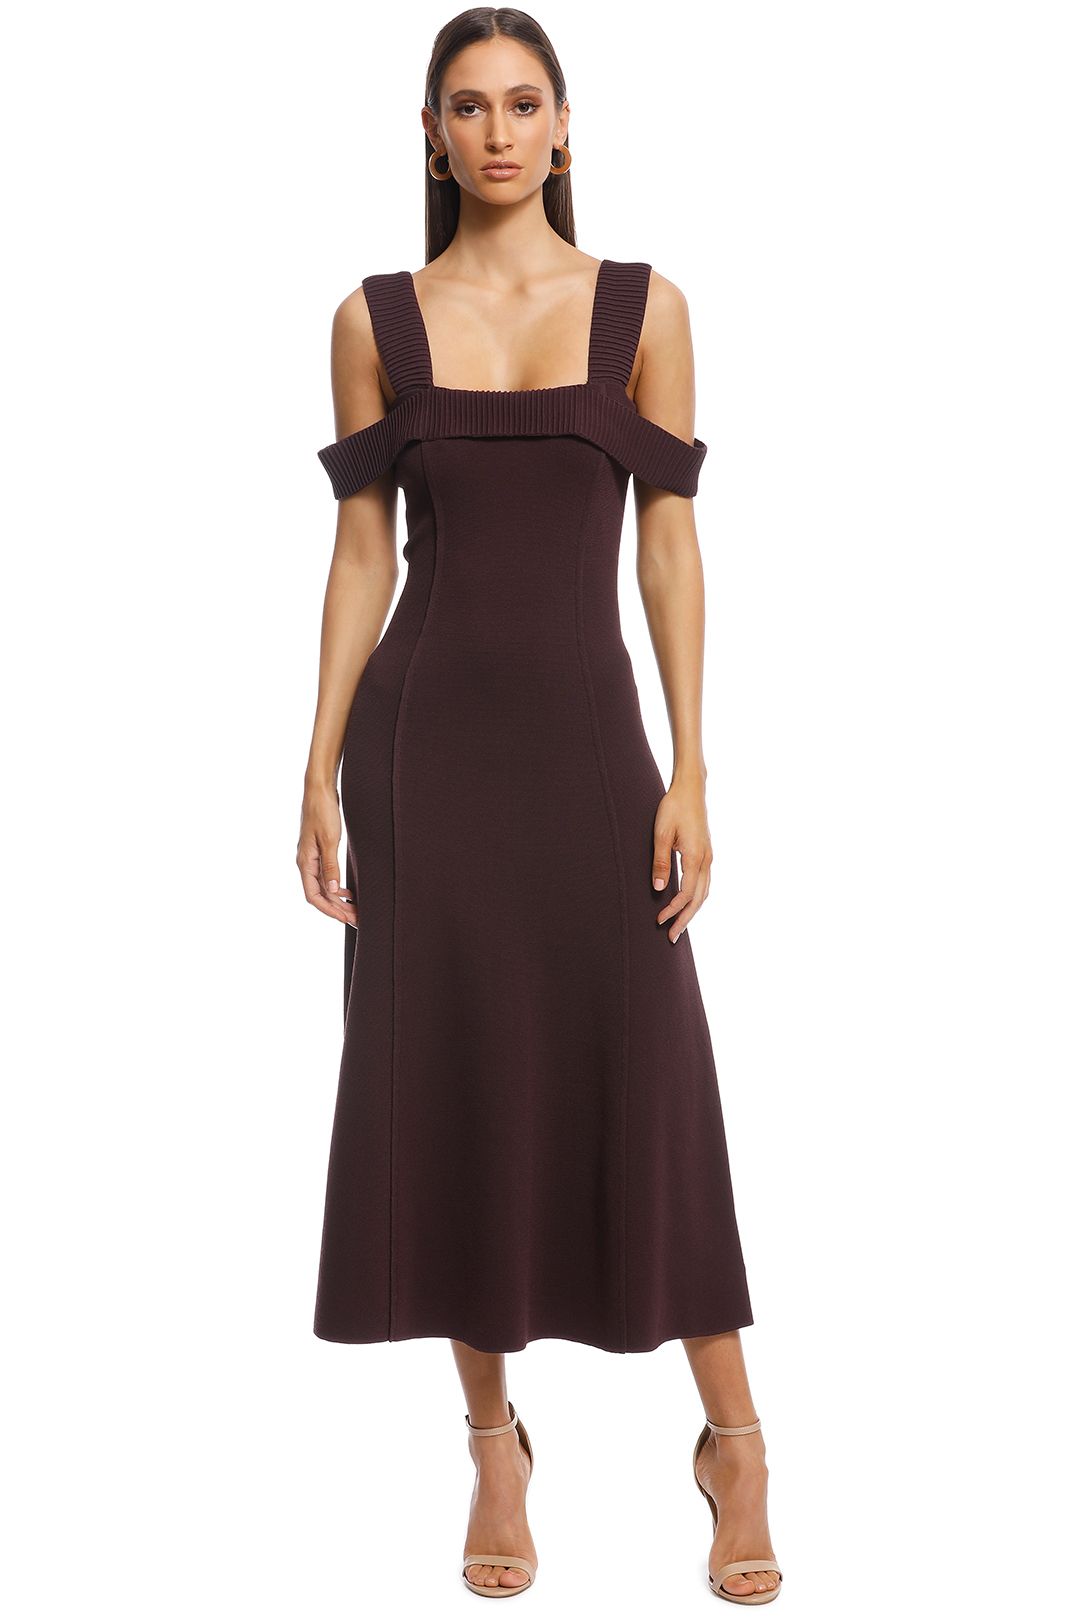 Camilla and Marc - Carole Fit and Flare Midi Dress - Burgundy - Front